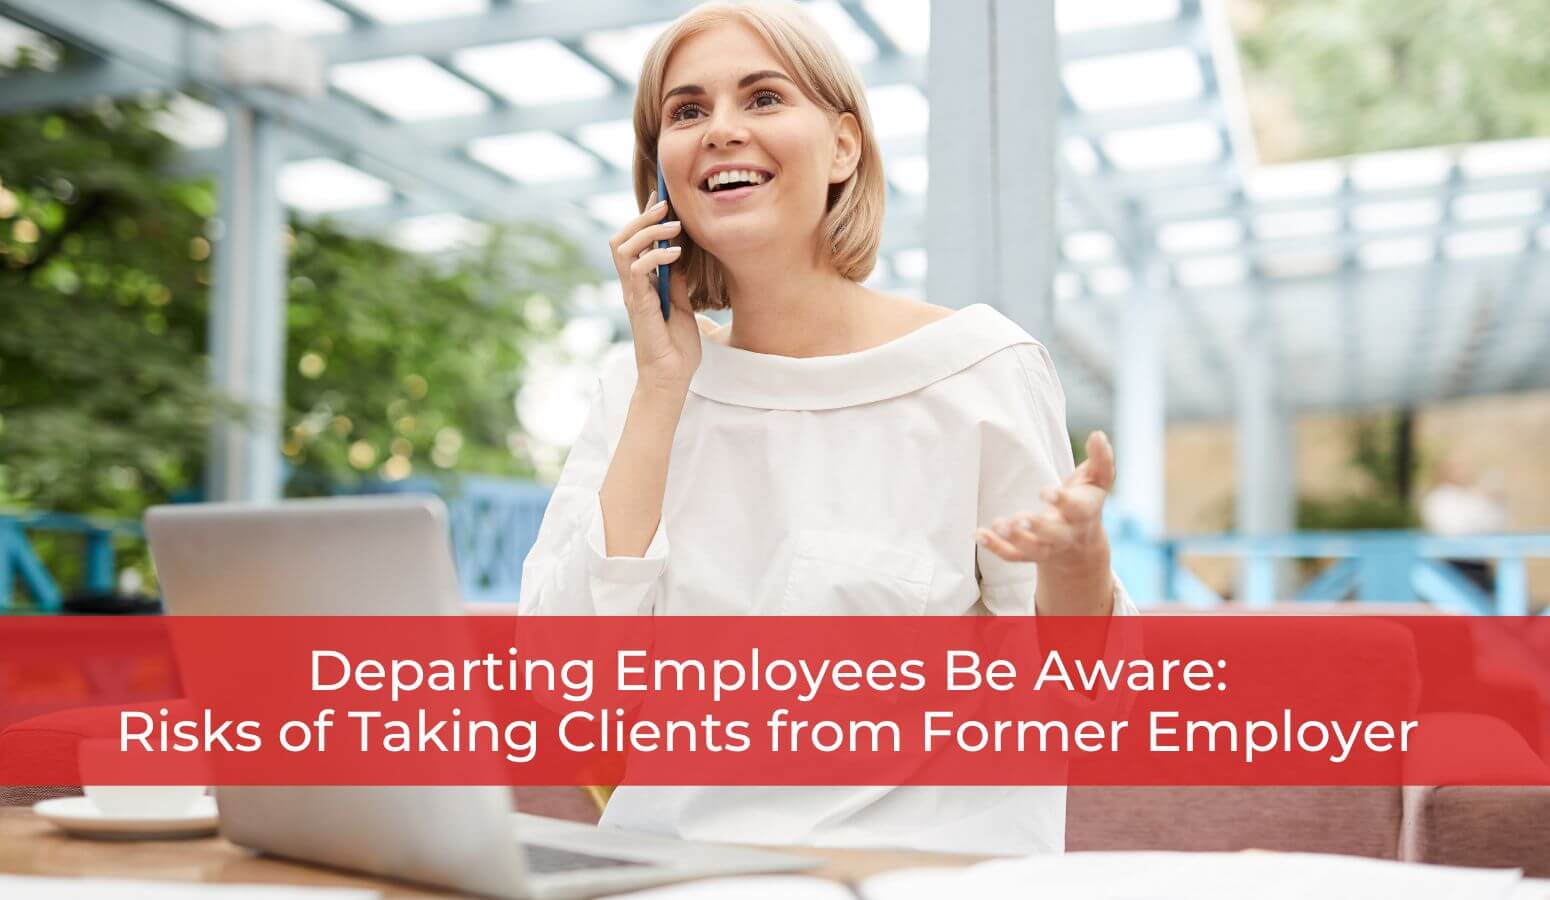 Featured image for “Departing Employees Be Aware: Risks of Taking Clients from Former Employer”